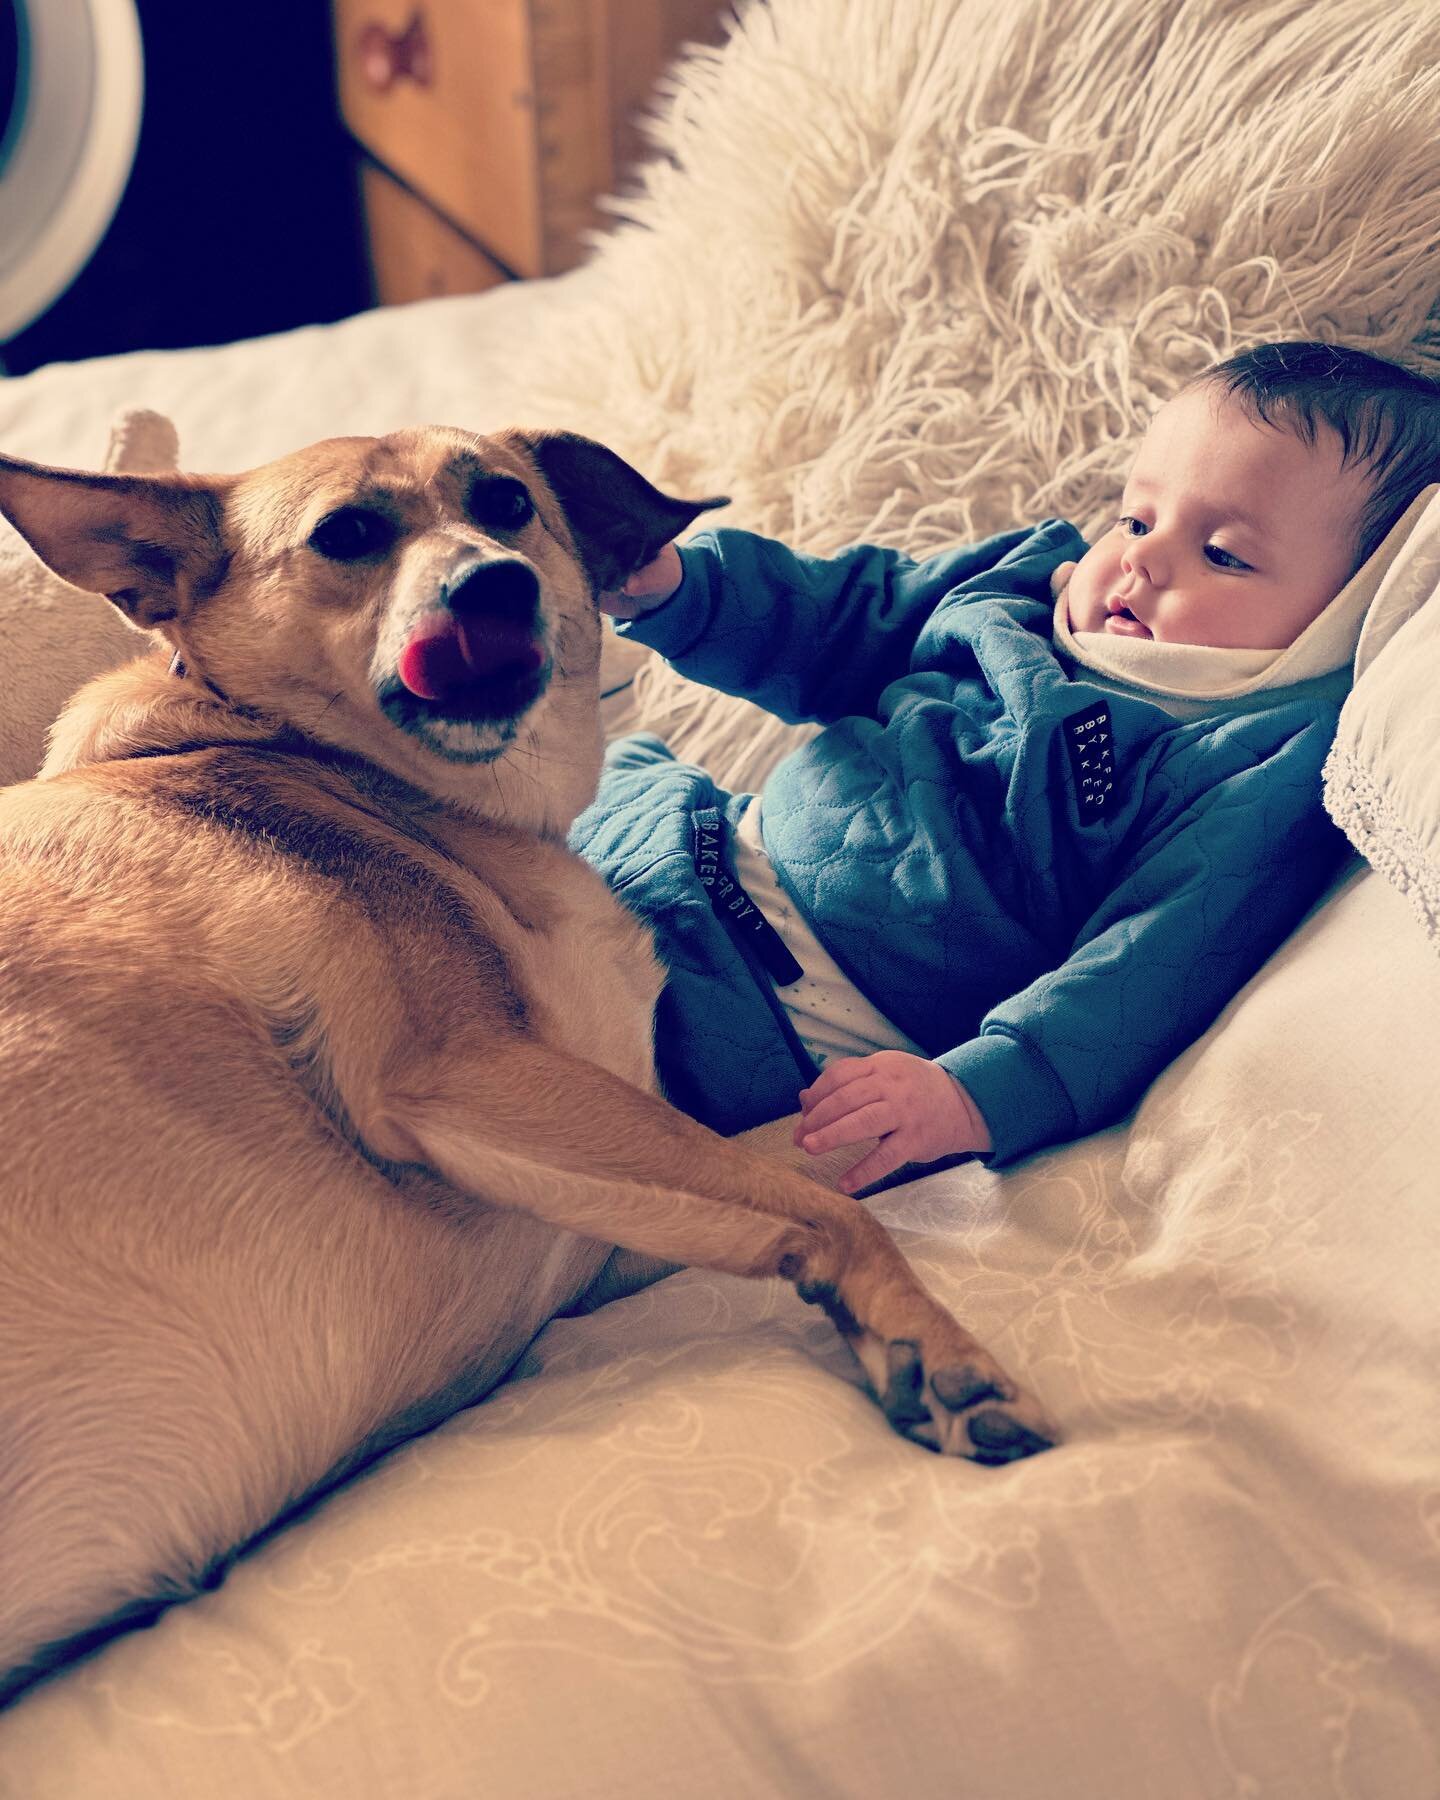 Manbaby&rsquo;s Best Friend! 
My Grandson learning that Dogs are Simply the Best! 
Daisy &amp; River 🐾💙
Happy Monday to all my fellow Dog Lovers! 🐾🐾🐾🐶🐶🐾🐾🐾